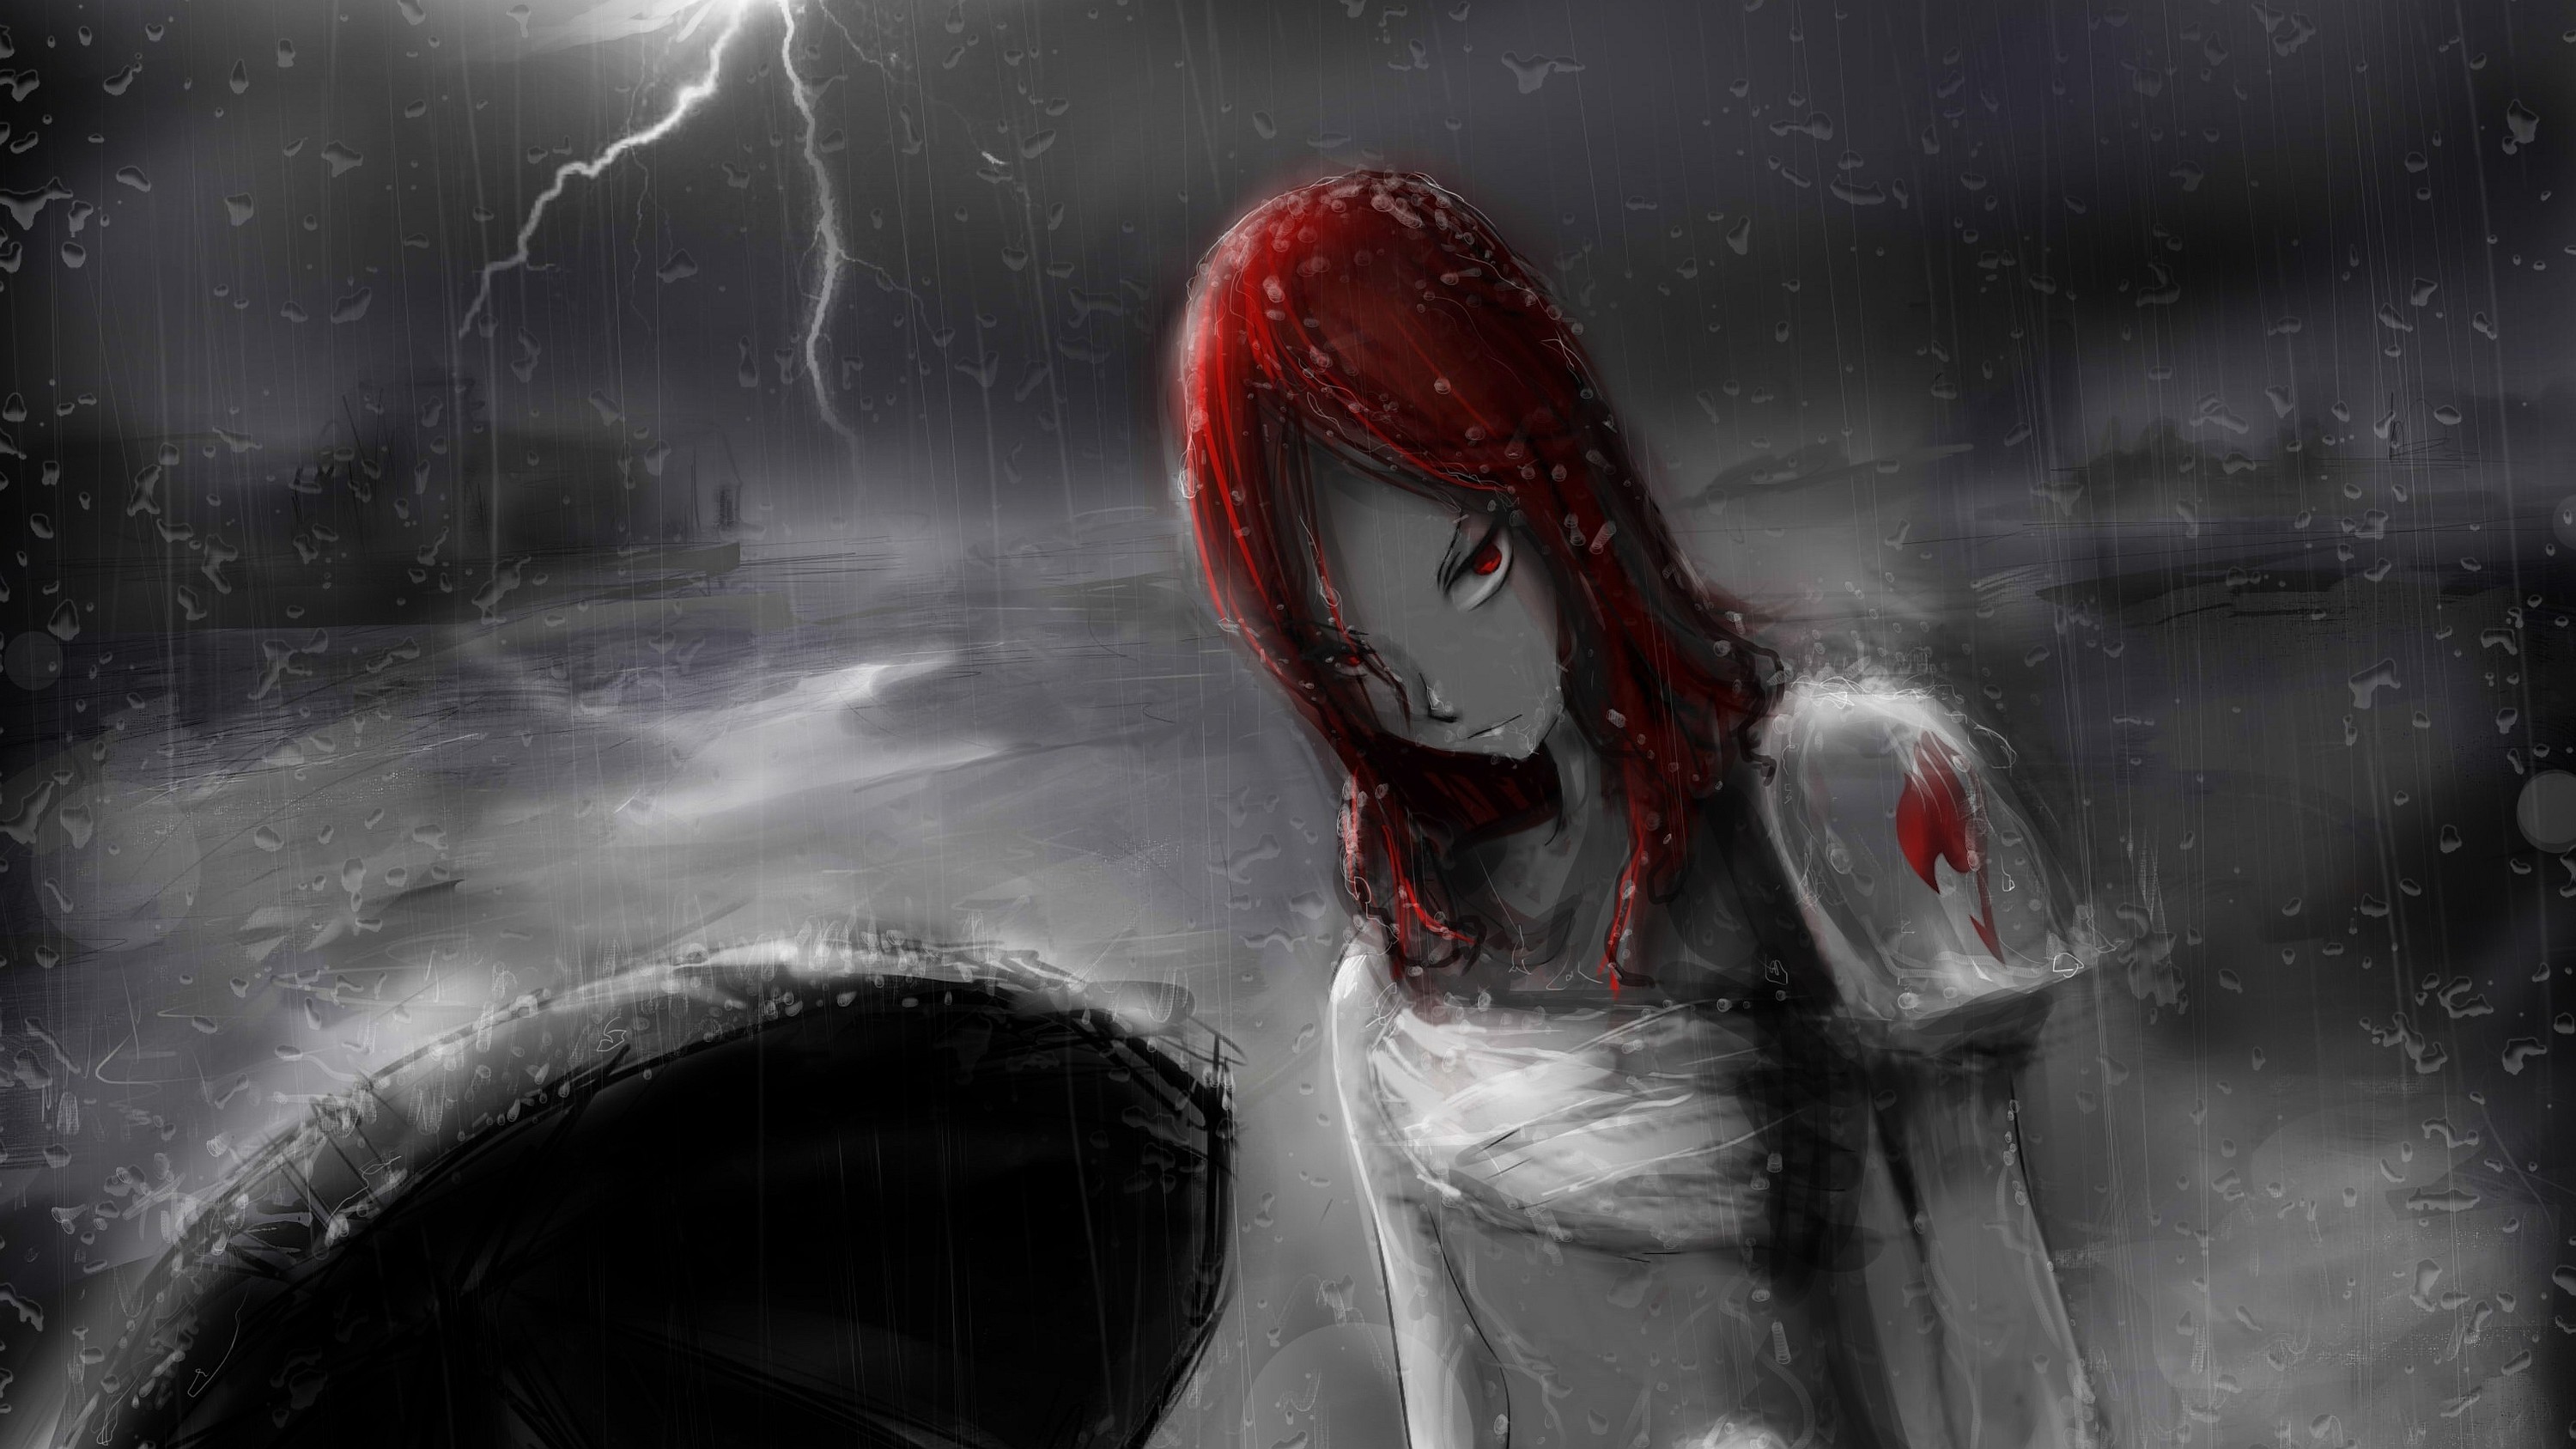 3000x1687 282 Erza Scarlet HD Wallpapers | Backgrounds - Wallpaper Abyss - Page 5